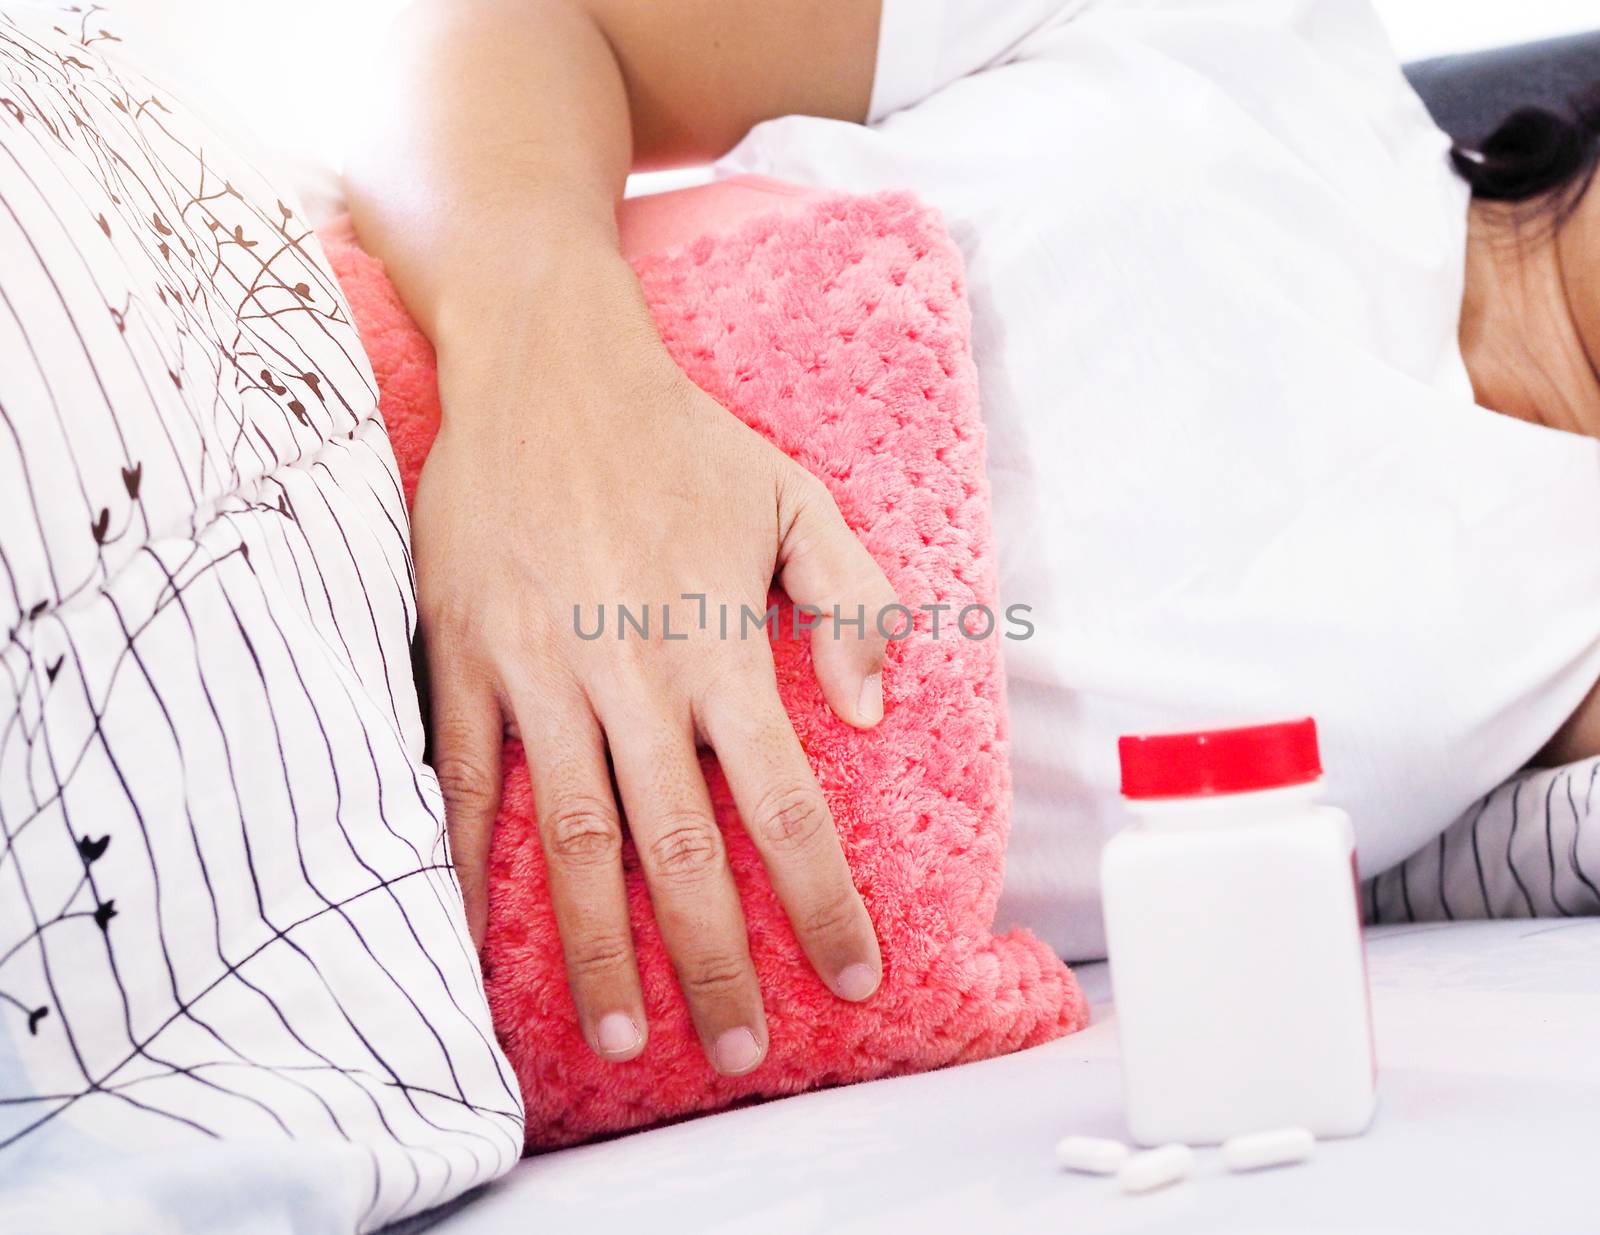 Asian women sleep and stomach ache Period cramps. have hot water bags and medicine bottles, painkillers for relief